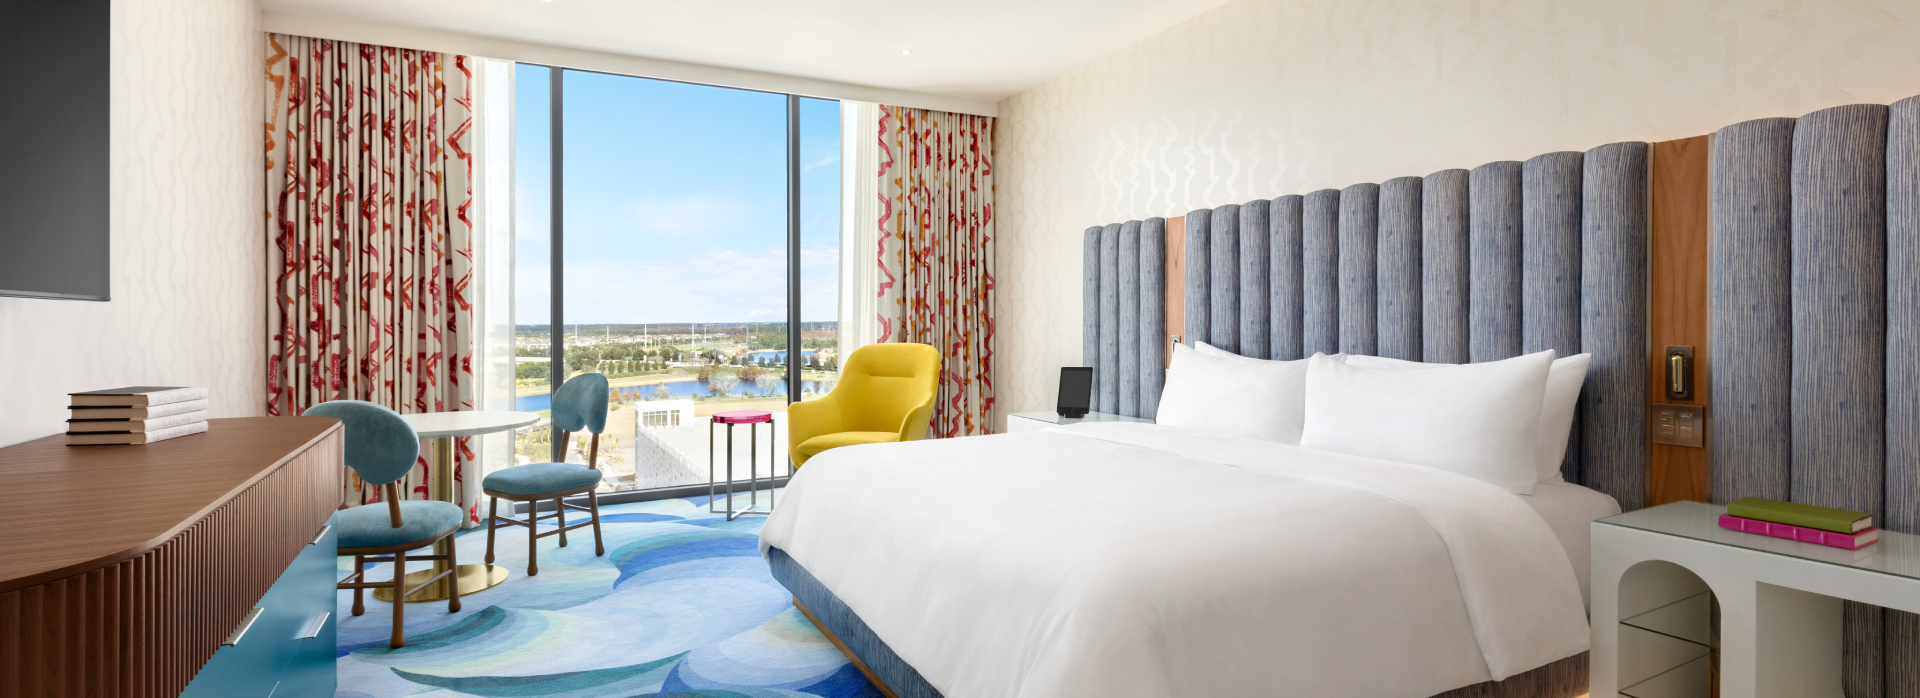 lake nona wave hotel model king room with a bed and a view